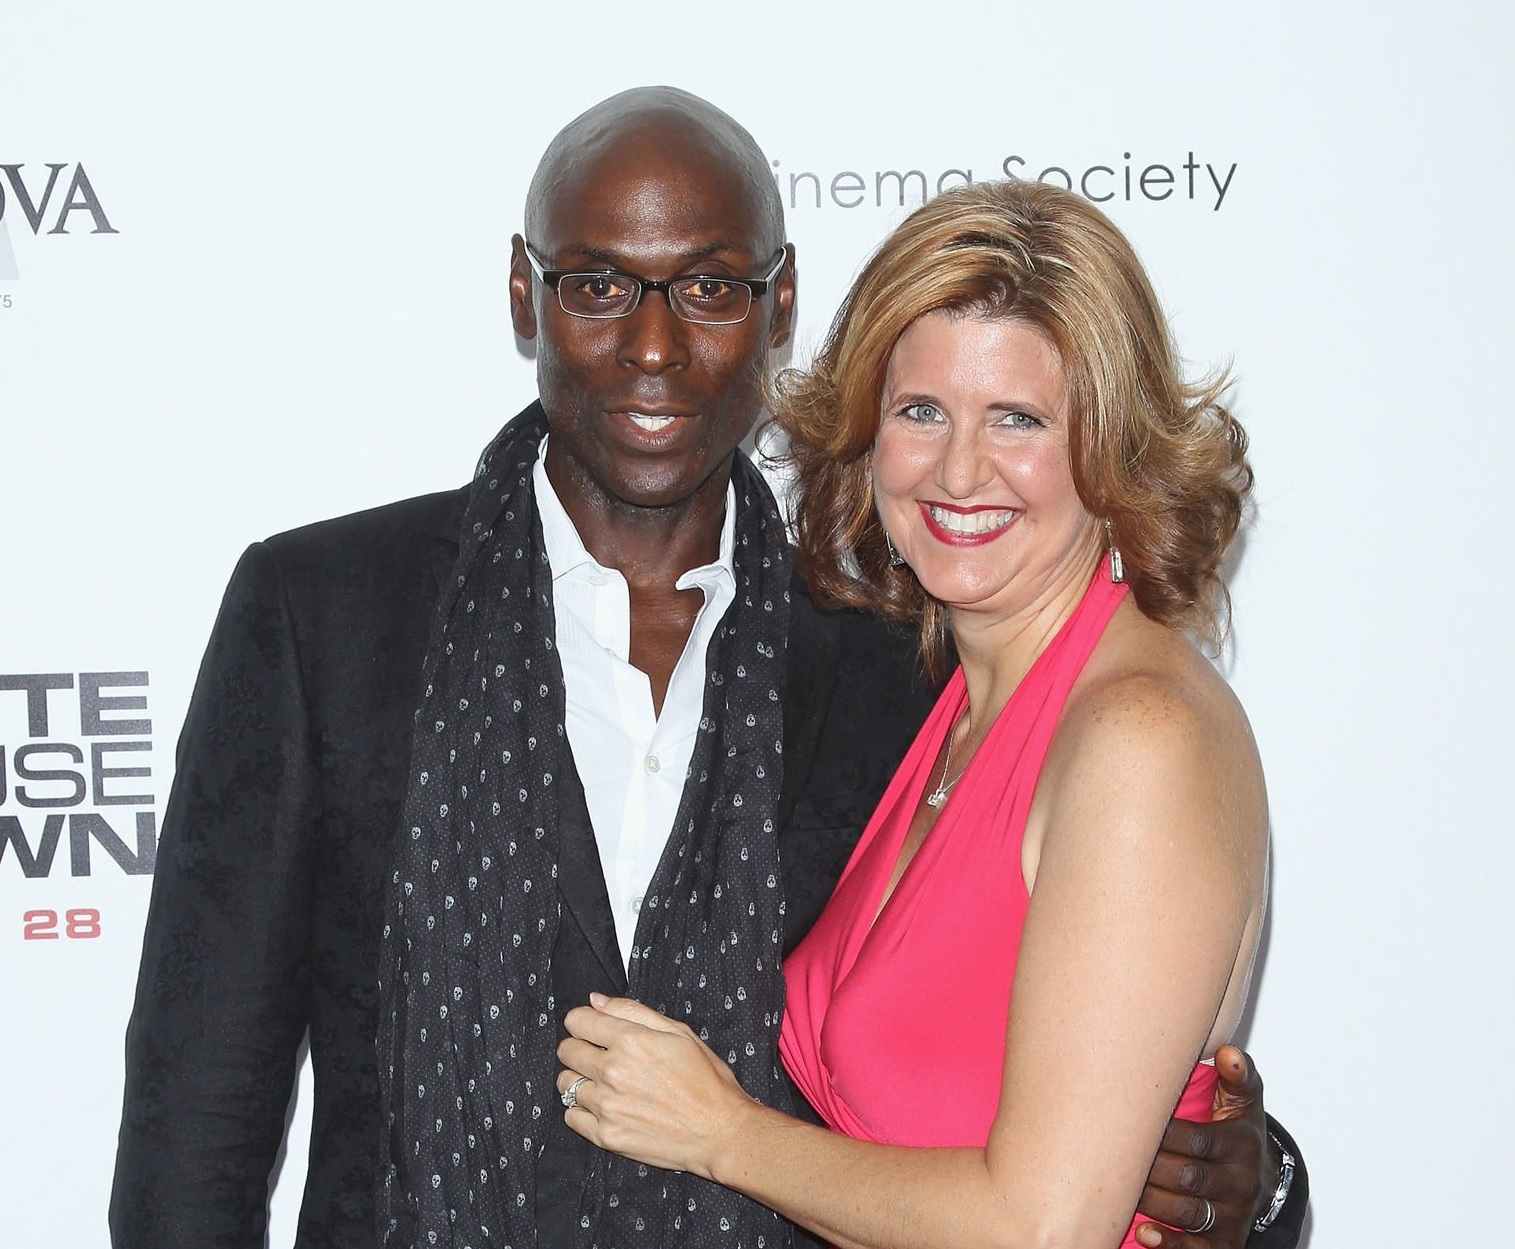 Lance Reddick and his wife Stephanie Reddick attend "White House Down" New York Premiere in 2013 